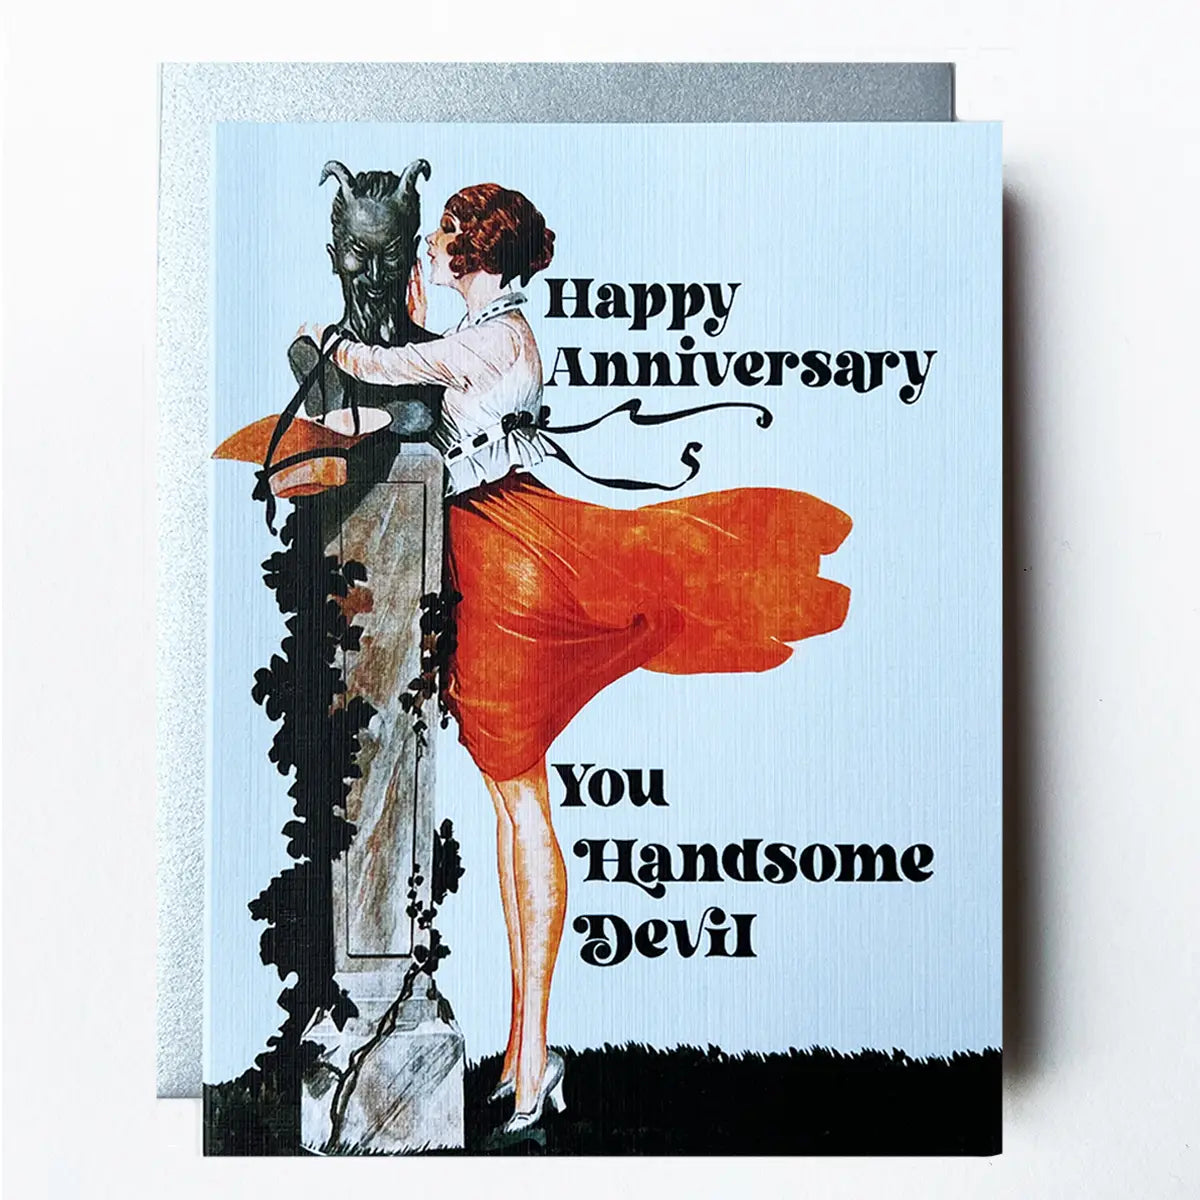 Happy Anniversary you handsome devel greeting card